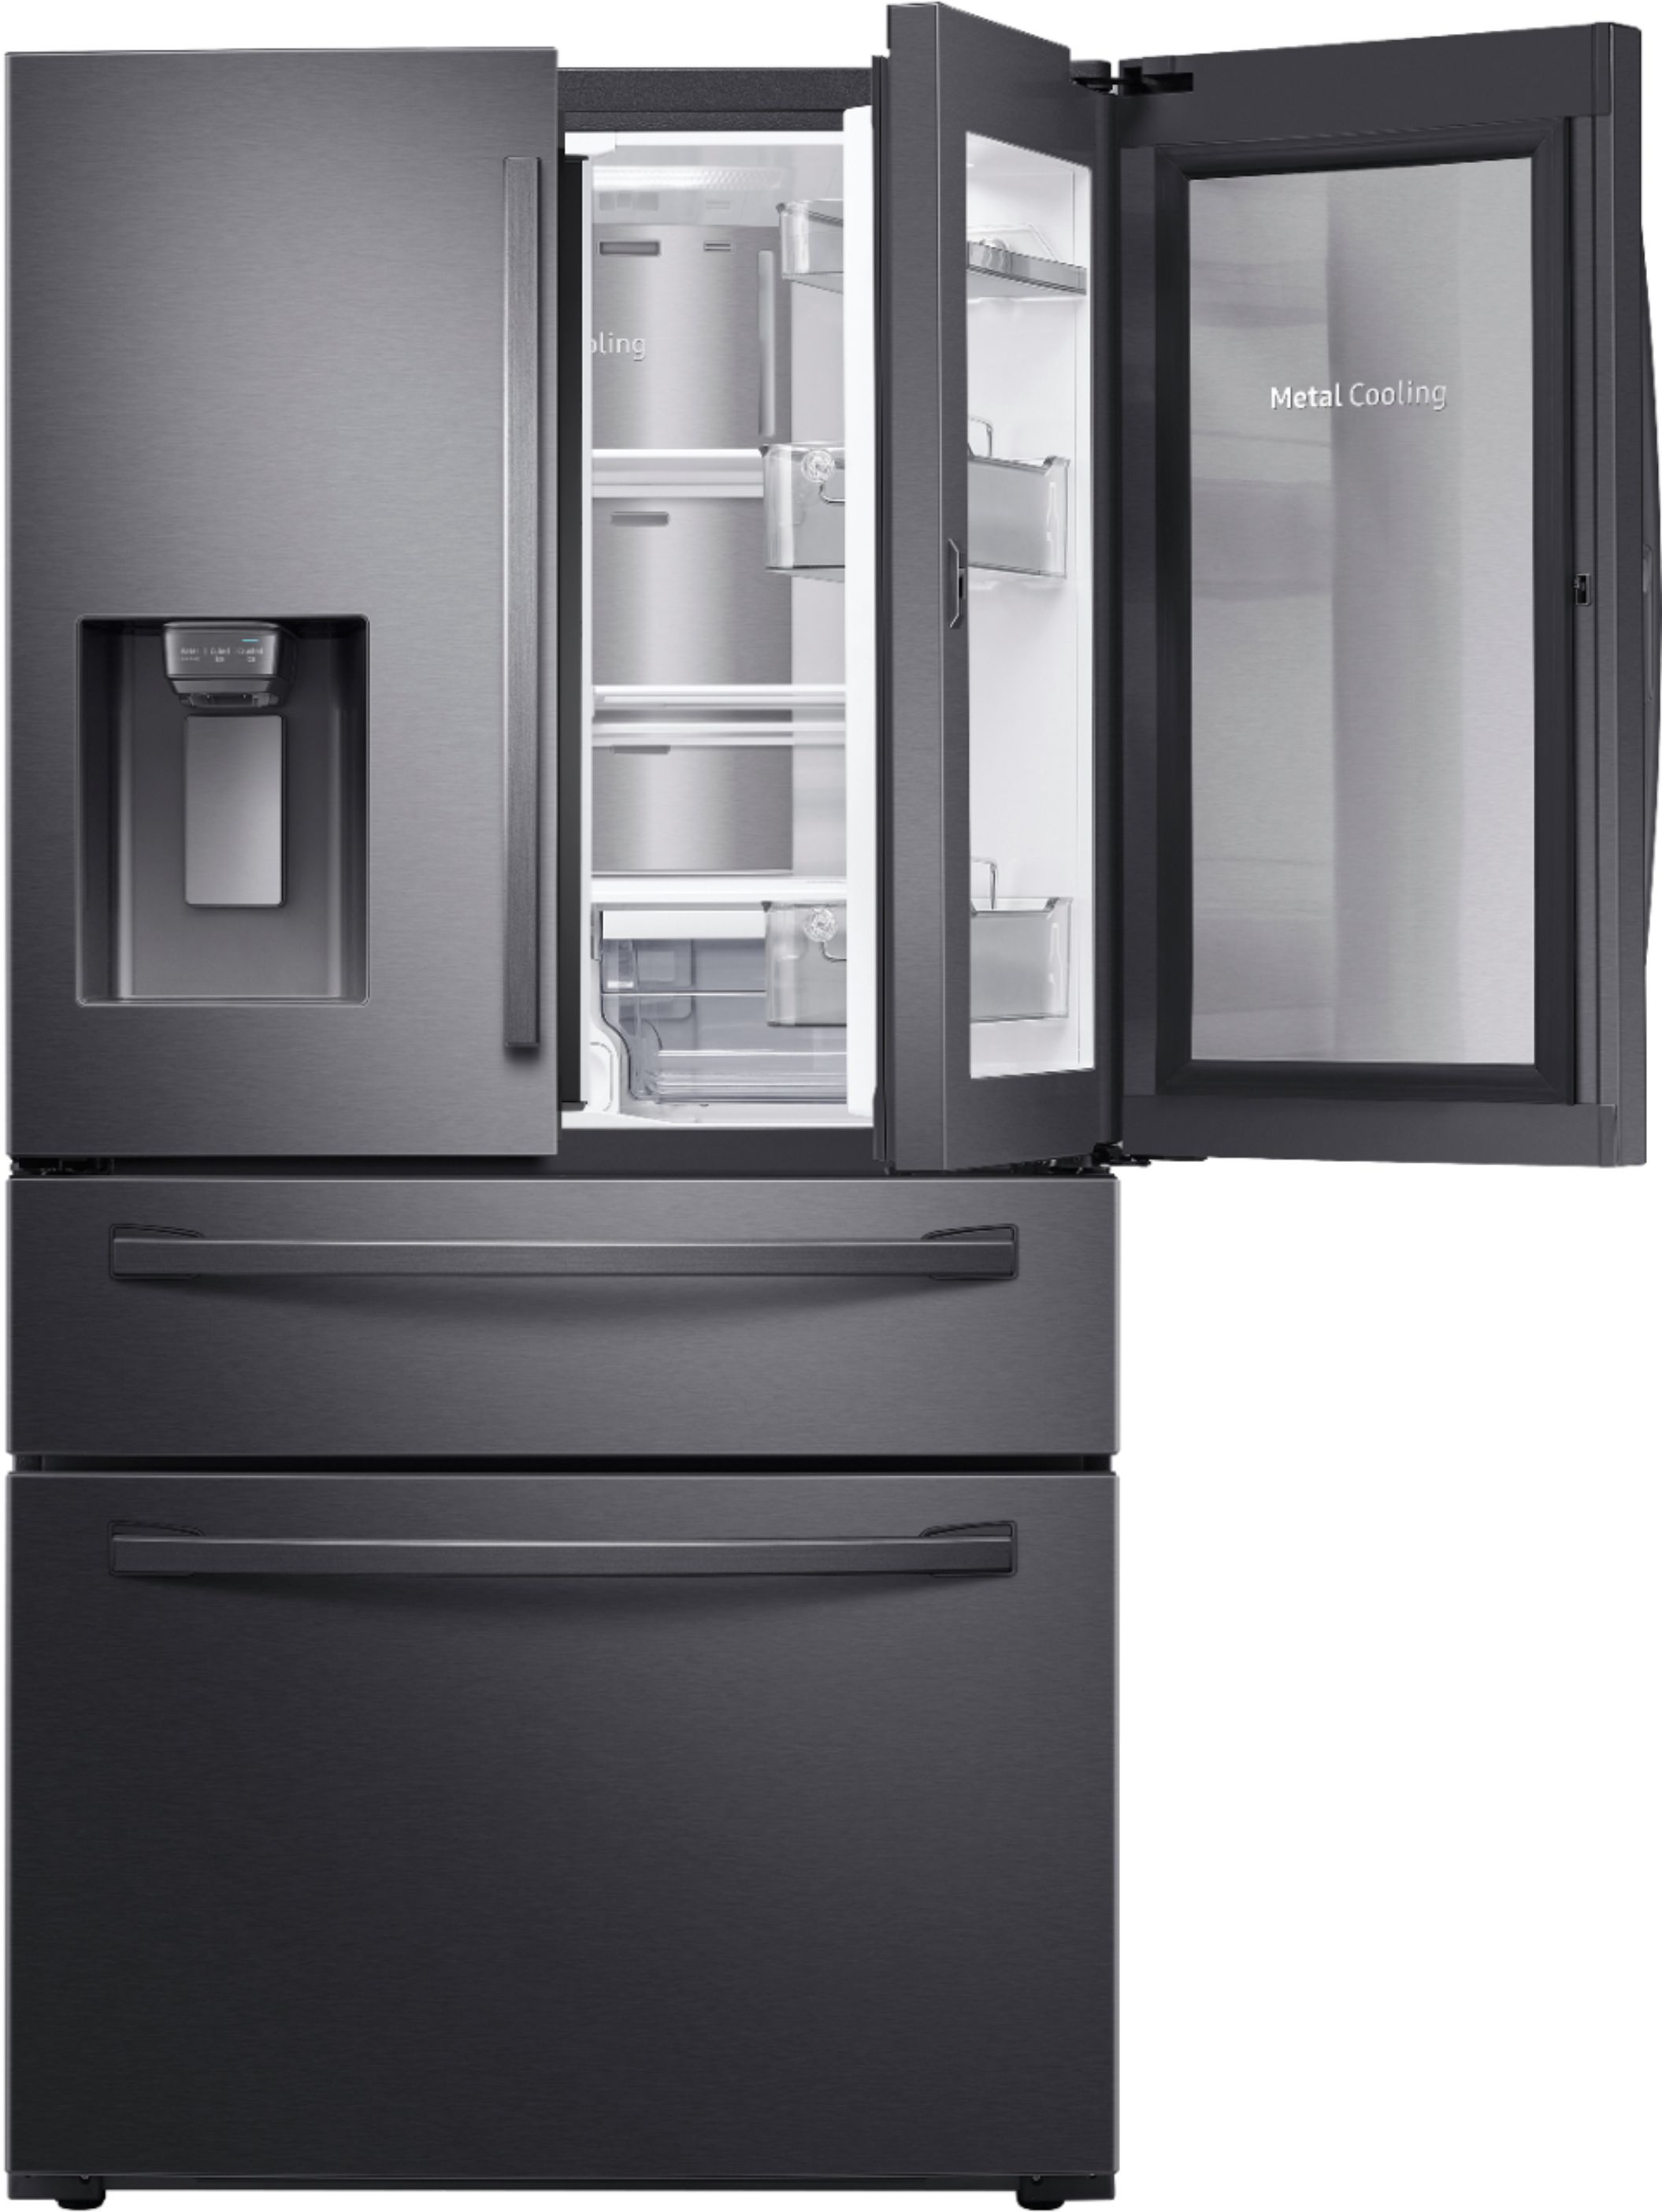 How To Change The Filter On Samsung Fridge – Press To Cook